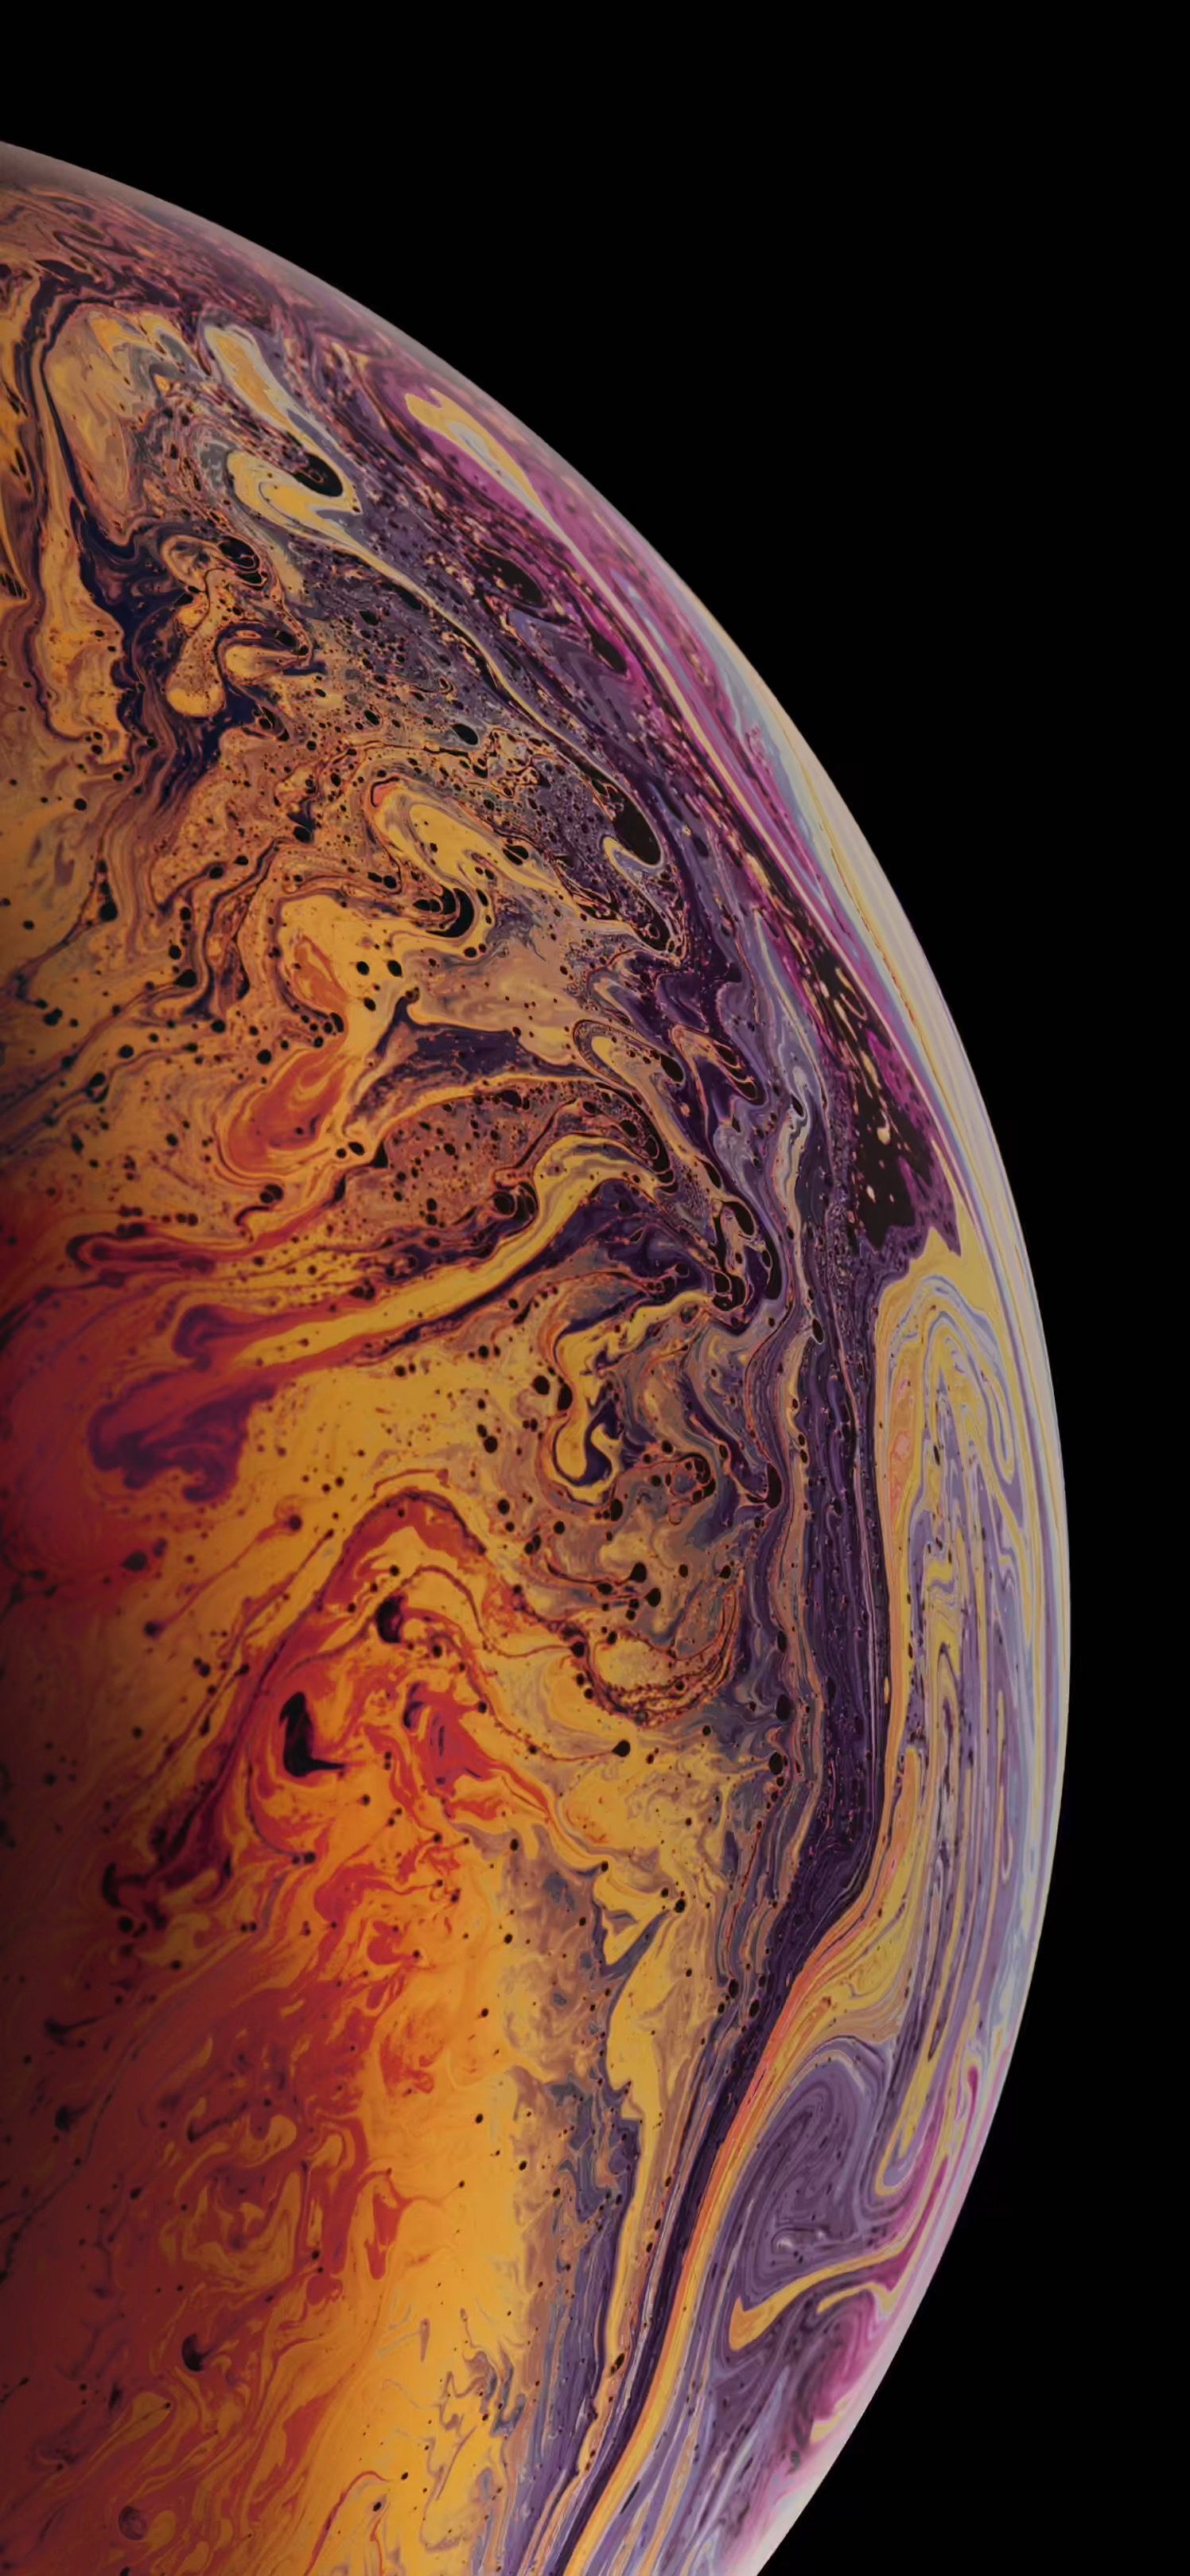 Iphone Earth Wallpapers